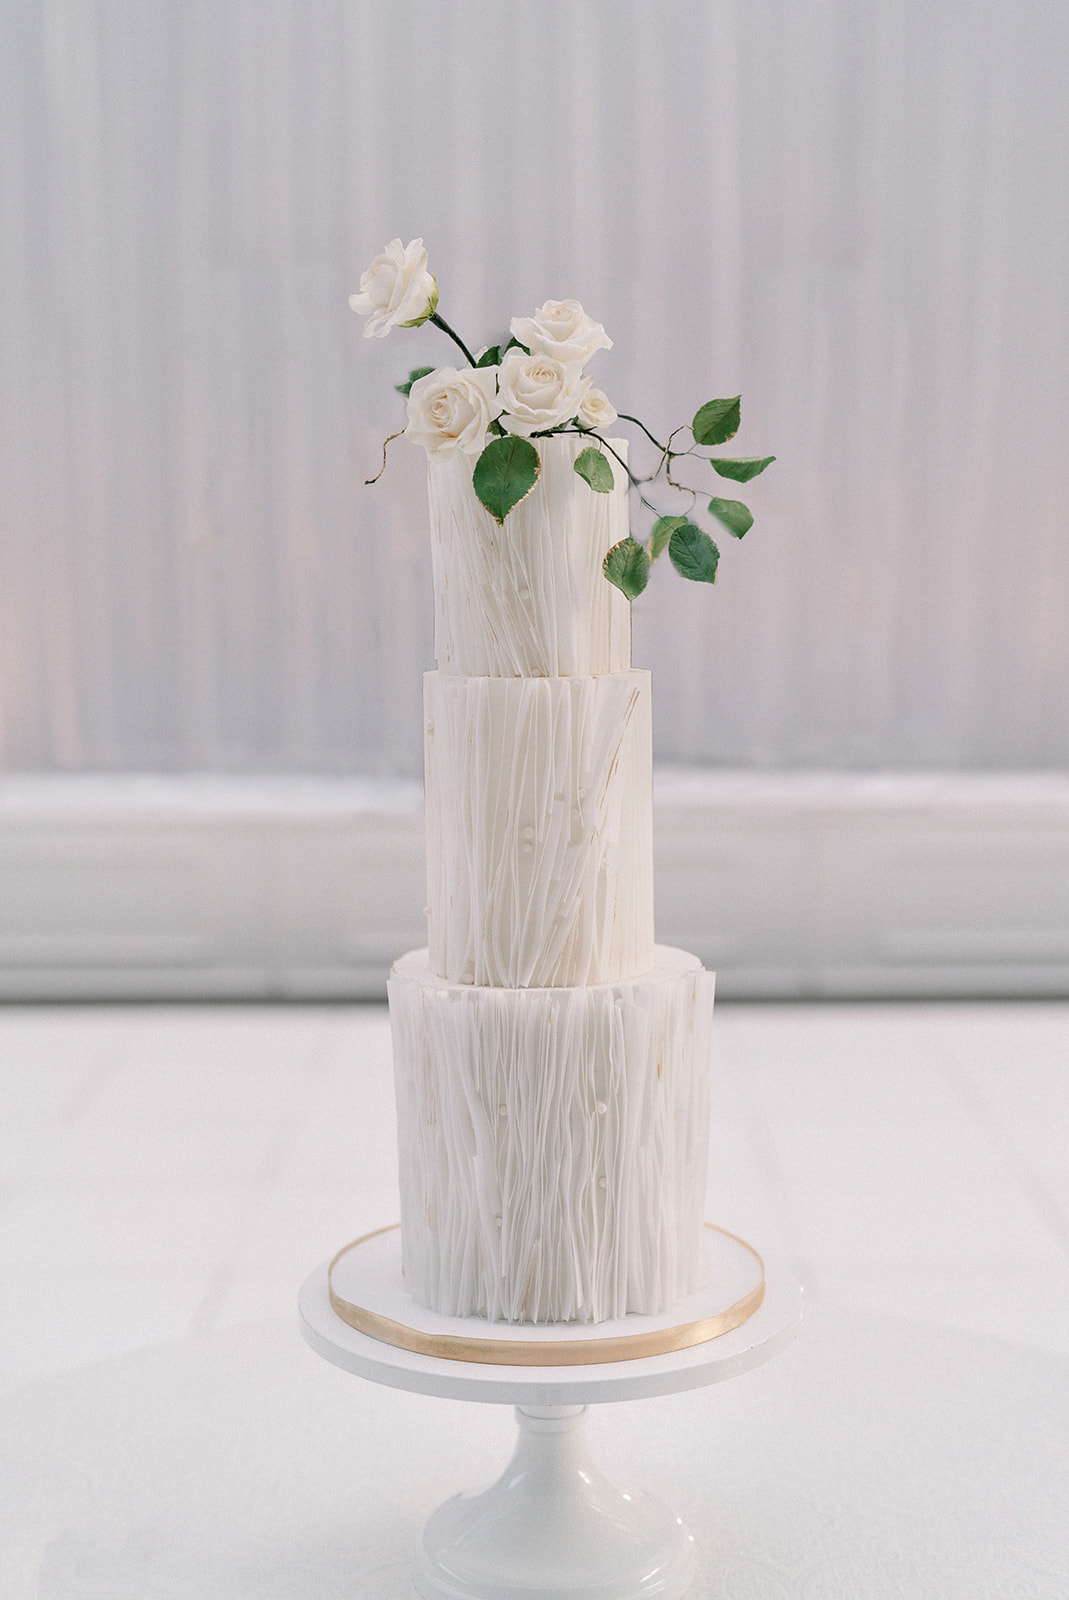 elegant and simple wedding cake at a Gold and White Wedding Reception at the Cleveland Museum of Art by HeatherLily